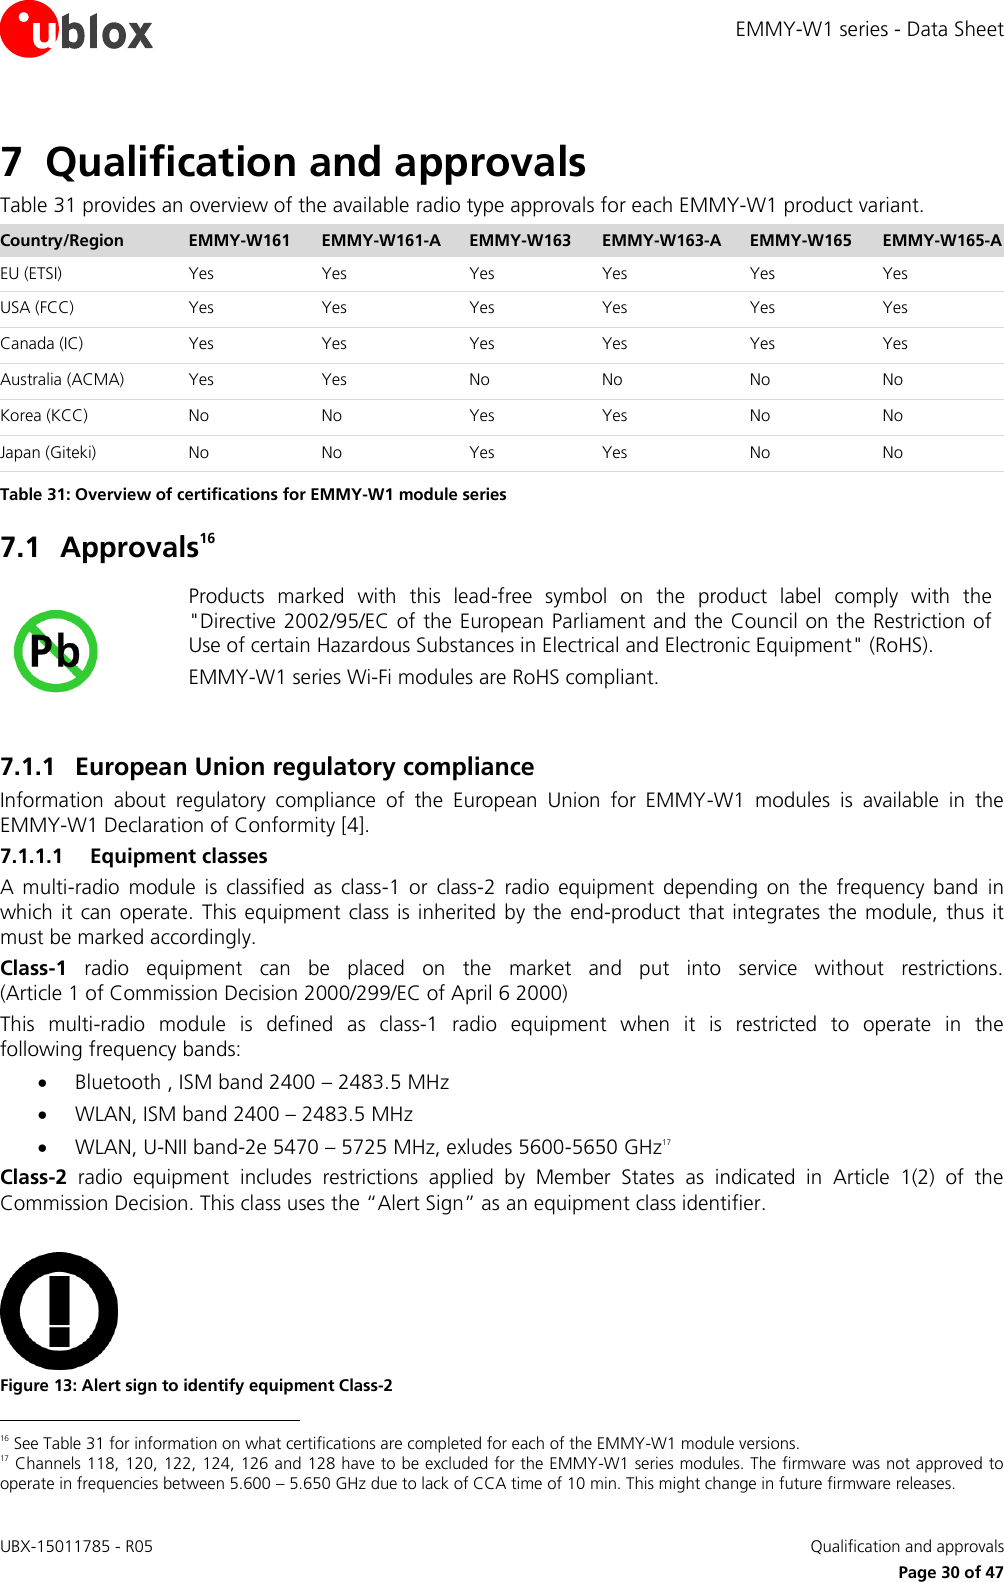 EMMY-W1 series - Data Sheet UBX-15011785 - R05   Qualification and approvals     Page 30 of 47 7 Qualification and approvals Table 31 provides an overview of the available radio type approvals for each EMMY-W1 product variant. Country/Region EMMY-W161 EMMY-W161-A EMMY-W163 EMMY-W163-A EMMY-W165 EMMY-W165-A EU (ETSI) Yes Yes Yes Yes Yes Yes USA (FCC) Yes Yes Yes Yes Yes Yes Canada (IC) Yes Yes Yes Yes Yes Yes Australia (ACMA) Yes Yes No No No No Korea (KCC) No No Yes Yes No No Japan (Giteki) No No Yes Yes No No Table 31: Overview of certifications for EMMY-W1 module series 7.1 Approvals16  Products  marked  with  this  lead-free  symbol  on  the  product  label  comply  with  the &quot;Directive 2002/95/EC of the European Parliament and the Council on the Restriction of Use of certain Hazardous Substances in Electrical and Electronic Equipment&quot; (RoHS). EMMY-W1 series Wi-Fi modules are RoHS compliant.  7.1.1 European Union regulatory compliance Information  about  regulatory  compliance  of  the  European  Union  for  EMMY-W1  modules  is  available  in  the EMMY-W1 Declaration of Conformity [4]. 7.1.1.1 Equipment classes A  multi-radio  module  is  classified  as  class-1  or  class-2  radio  equipment  depending  on  the  frequency  band  in which it  can operate. This equipment  class is  inherited  by the  end-product  that integrates the module,  thus it must be marked accordingly.   Class-1  radio  equipment  can  be  placed  on  the  market  and  put  into  service  without  restrictions. (Article 1 of Commission Decision 2000/299/EC of April 6 2000) This  multi-radio  module  is  defined  as  class-1  radio  equipment  when  it  is  restricted  to  operate  in  the following frequency bands:  Bluetooth , ISM band 2400 – 2483.5 MHz  WLAN, ISM band 2400 – 2483.5 MHz  WLAN, U-NII band-2e 5470 – 5725 MHz, exludes 5600-5650 GHz17 Class-2  radio  equipment  includes  restrictions  applied  by  Member  States  as  indicated  in  Article  1(2)  of  the Commission Decision. This class uses the “Alert Sign” as an equipment class identifier.   Figure 13: Alert sign to identify equipment Class-2                                                       16 See Table 31 for information on what certifications are completed for each of the EMMY-W1 module versions.  17 Channels 118, 120, 122, 124, 126 and 128 have to be excluded for the EMMY-W1 series modules. The firmware was not approved to operate in frequencies between 5.600 – 5.650 GHz due to lack of CCA time of 10 min. This might change in future firmware releases. 